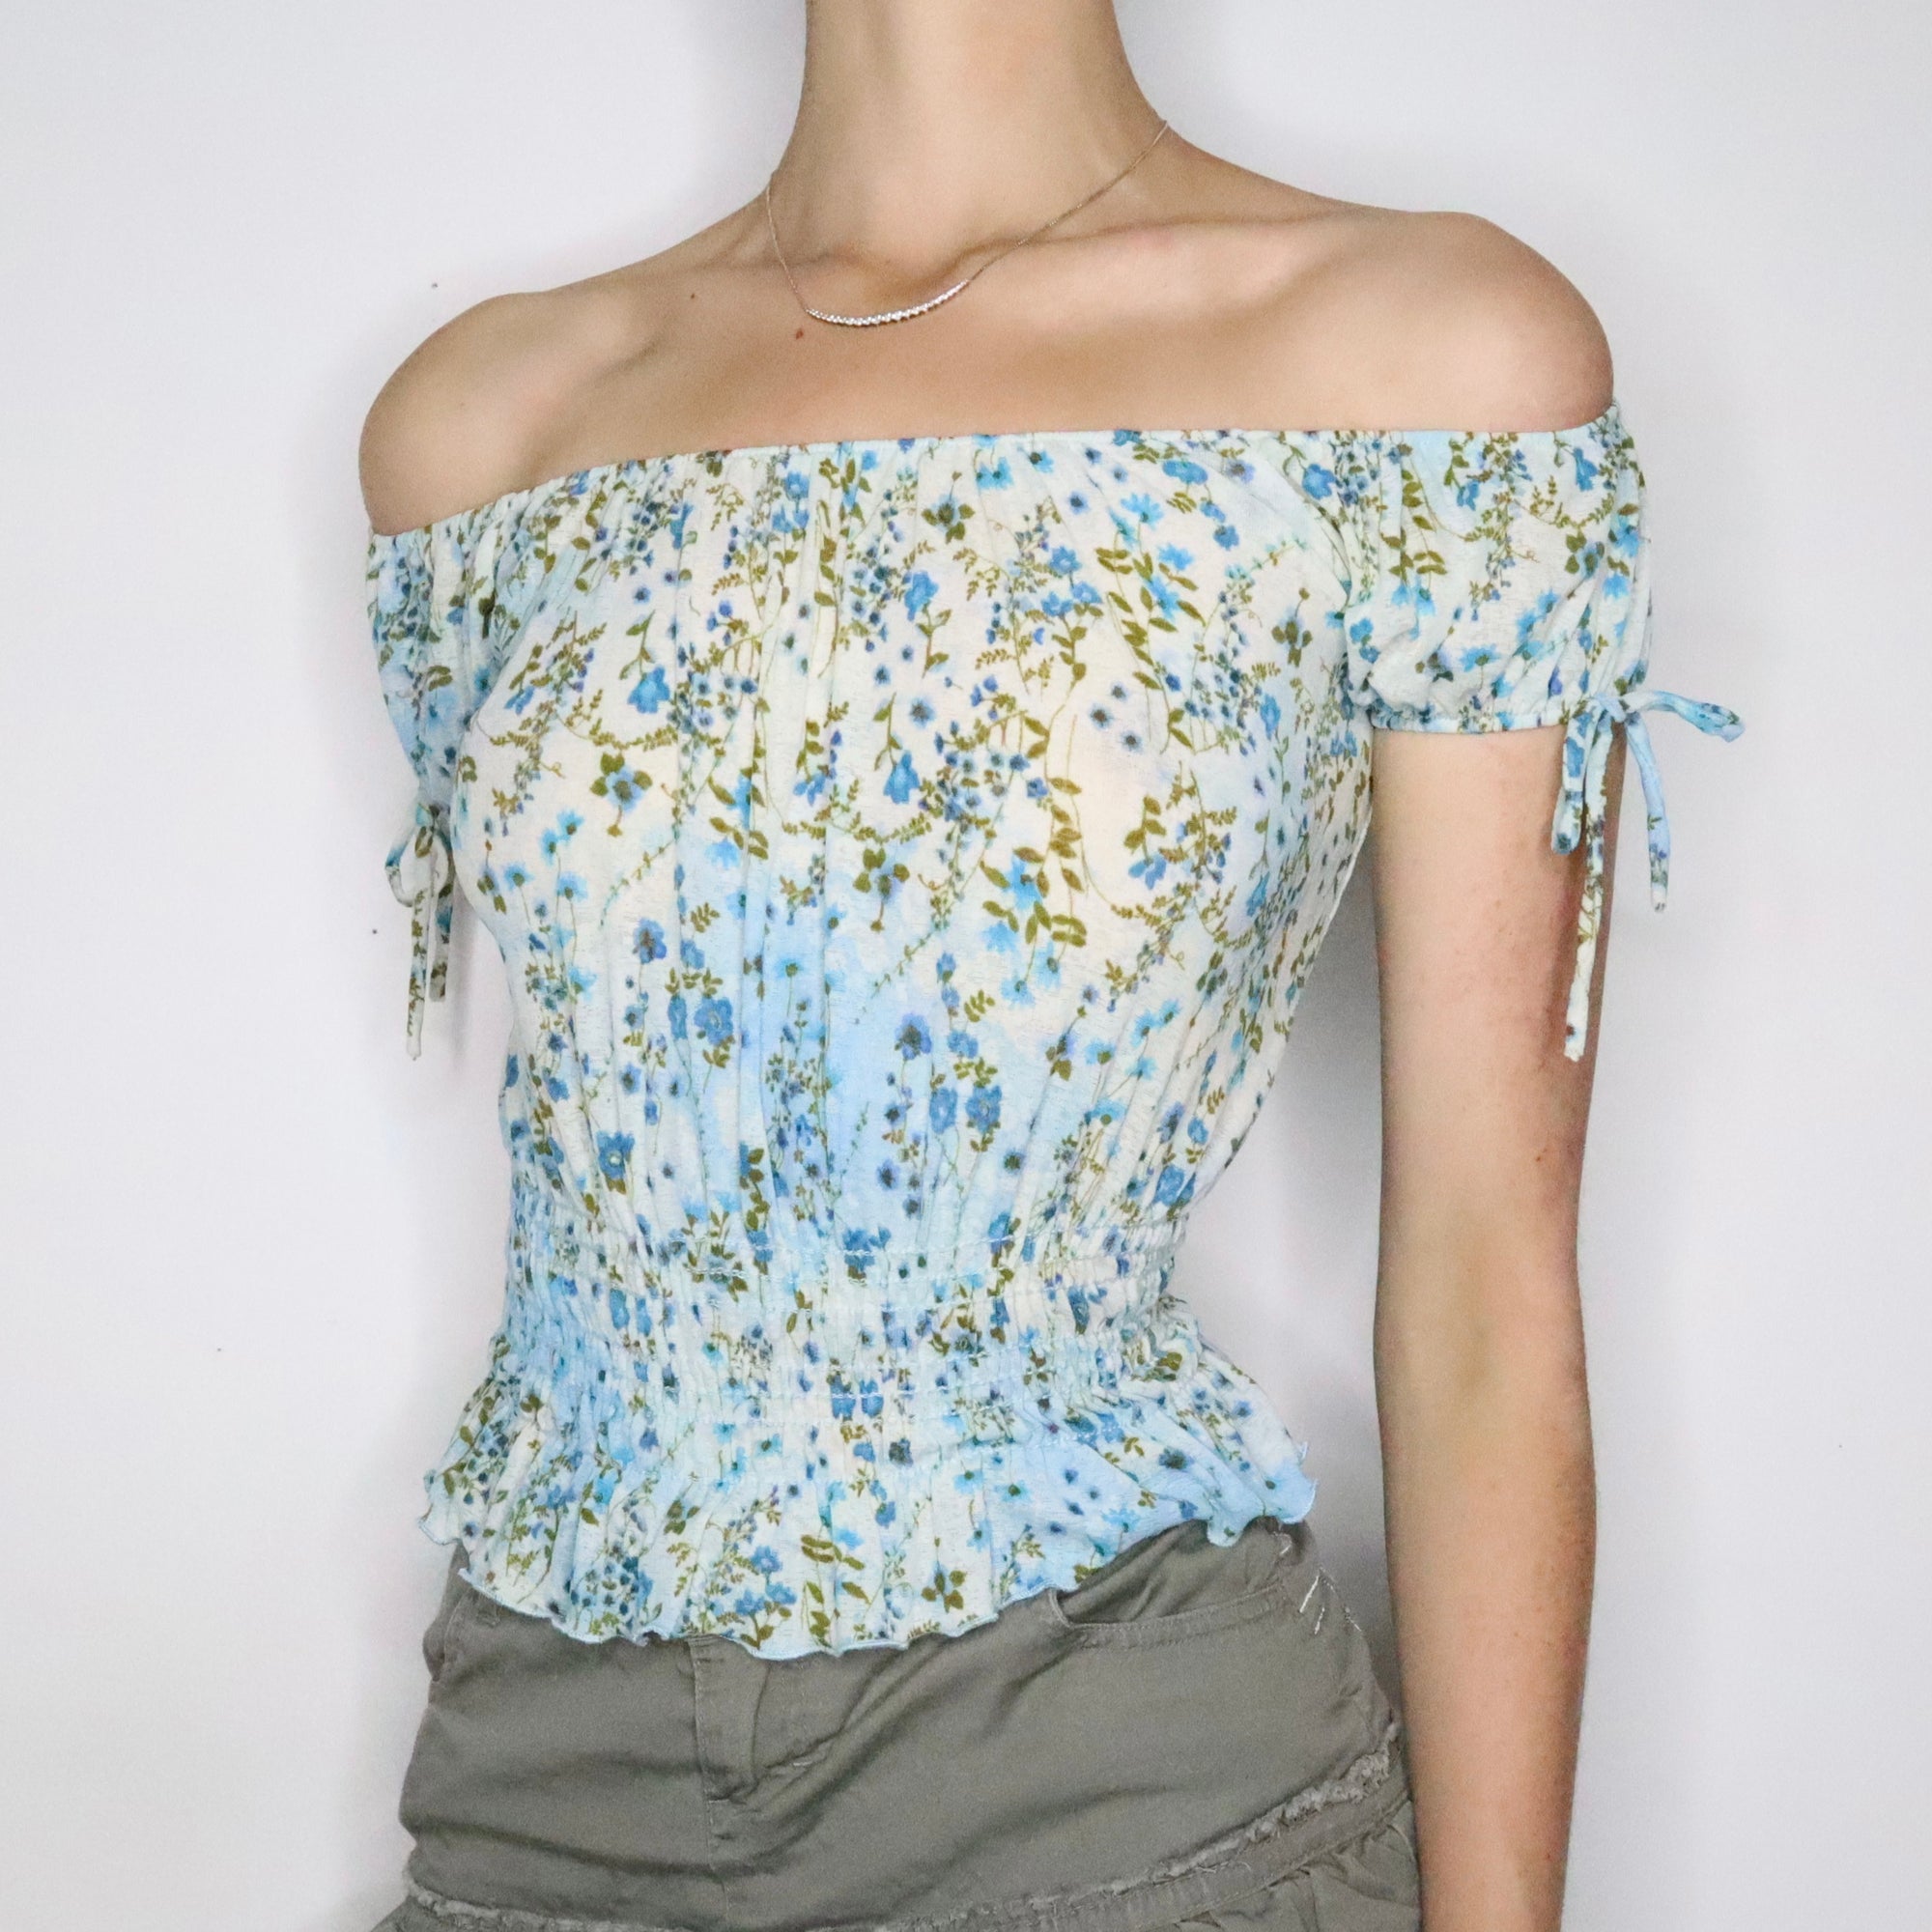 Baby Blue Floral Mesh Top (XS-S) - Imber Vintage